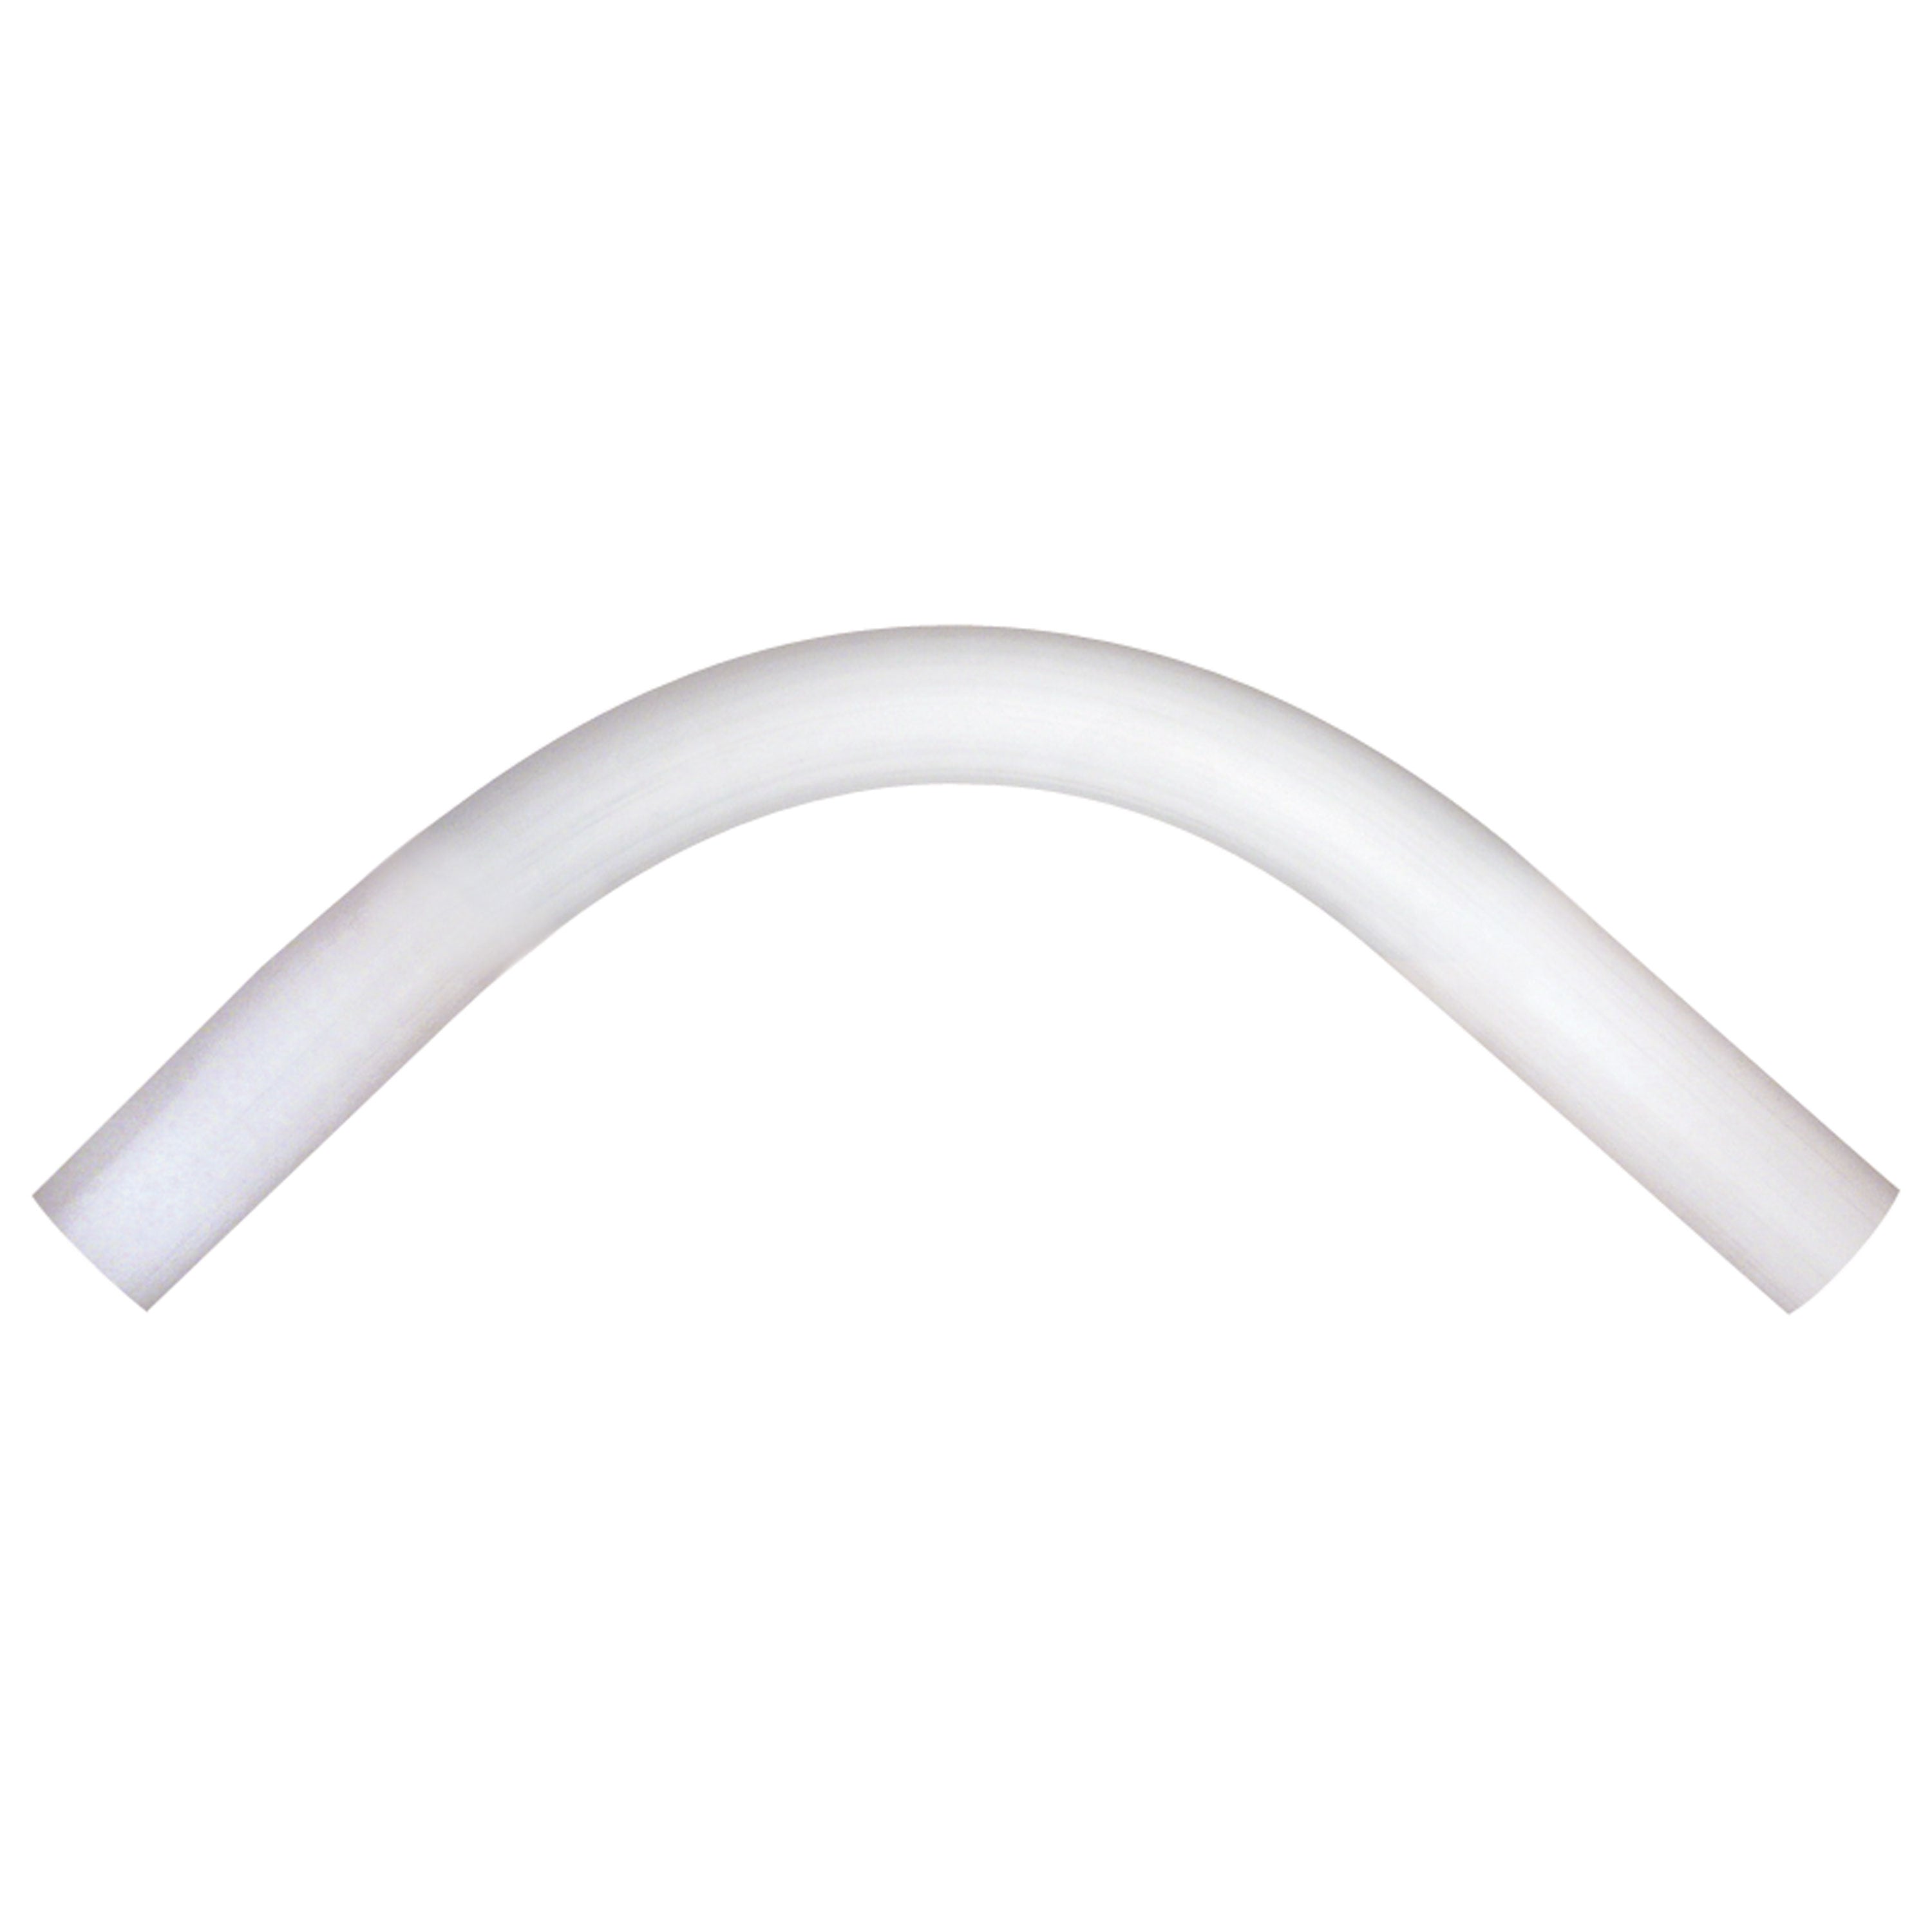 MrPEX Systems 7153862 Plastic Conduit Bend Support for Concrete Applications - 3/8" to 5/8" Tubing